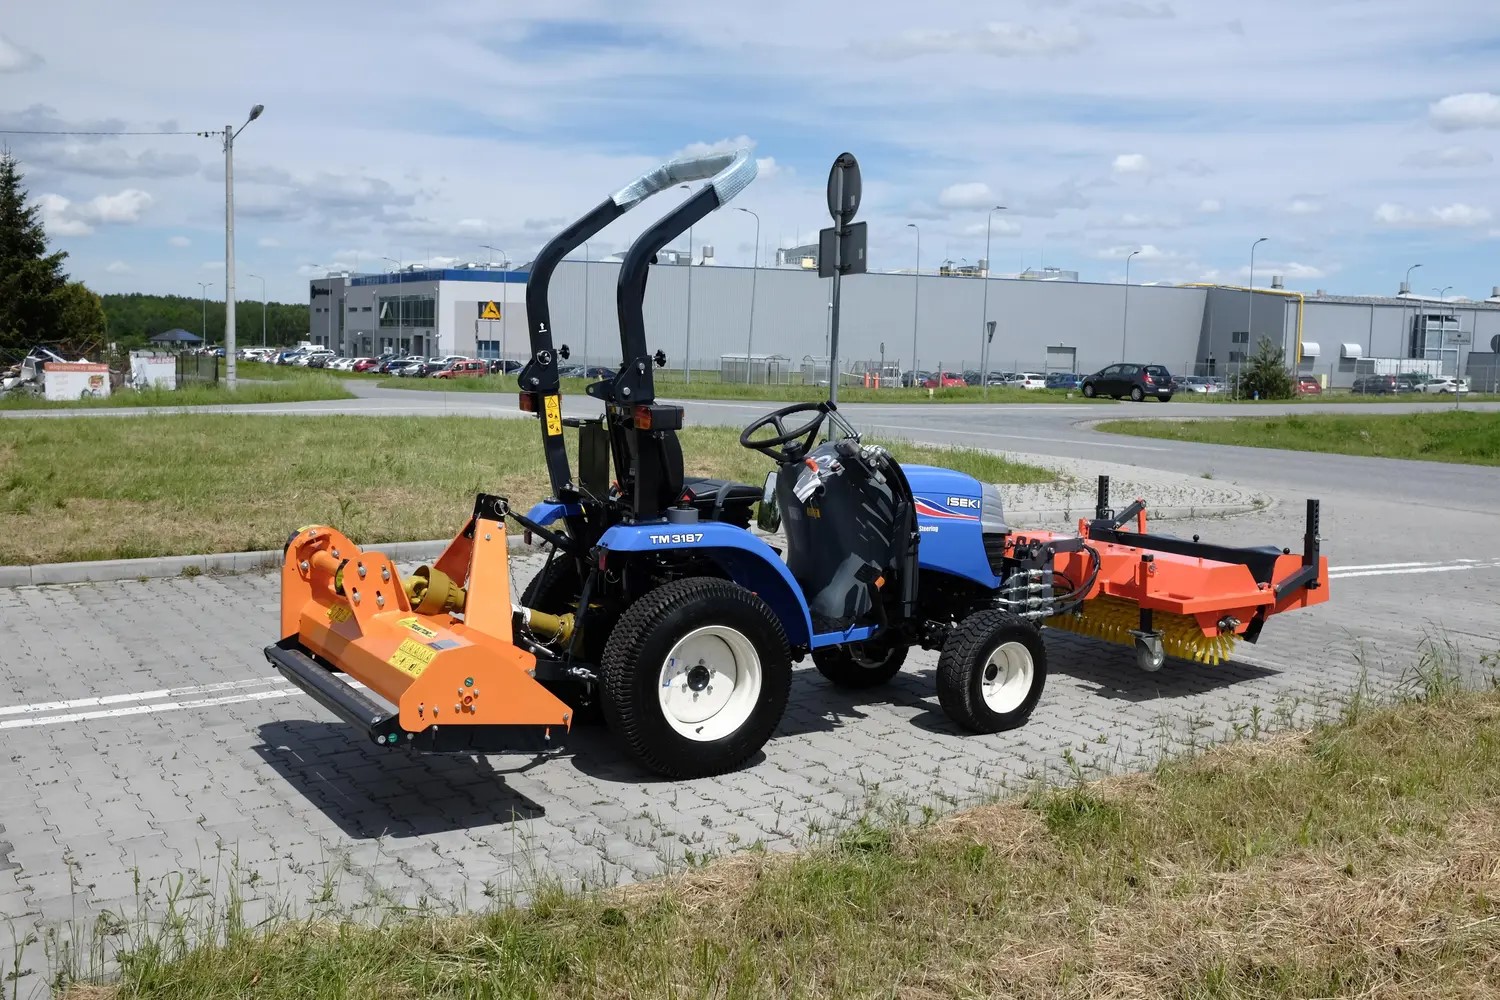 As an authorized ISEKI dealer, we present the Iseki TM3187 with VF 115 flail mower and sweeper